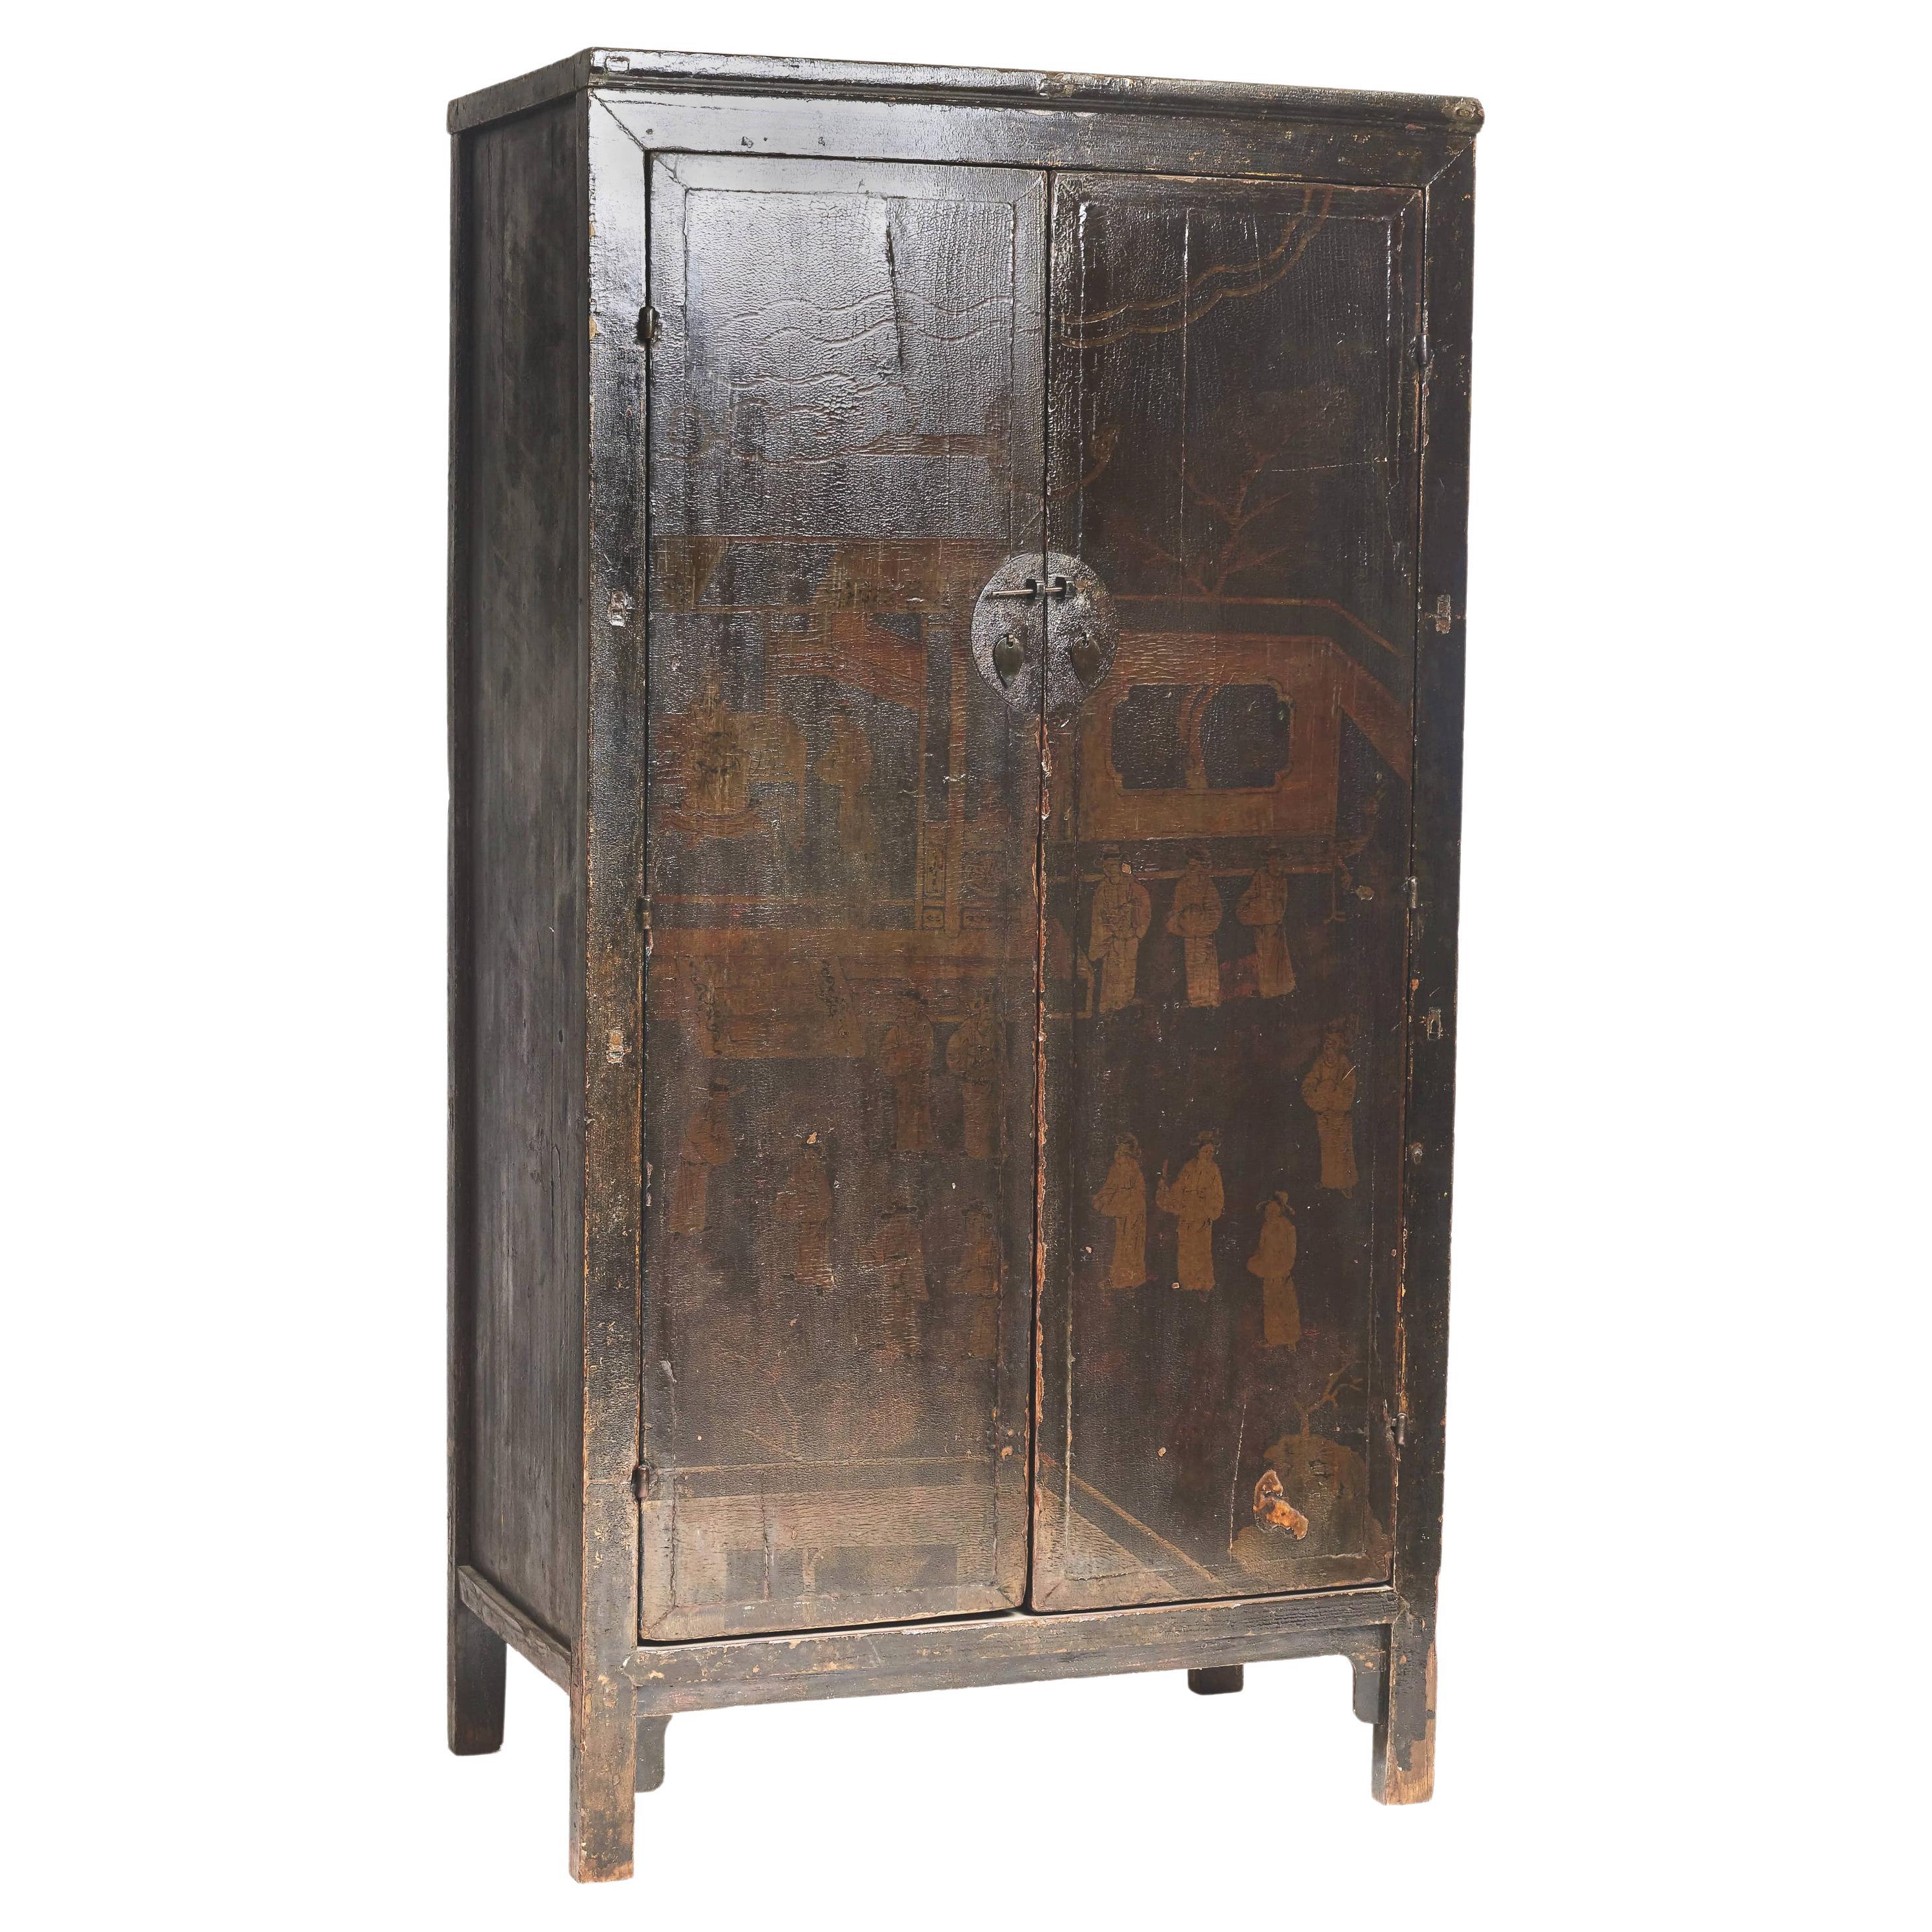 18Th Century Black/Brown lacquered With Decoration Cabinet From Shanxi Province For Sale